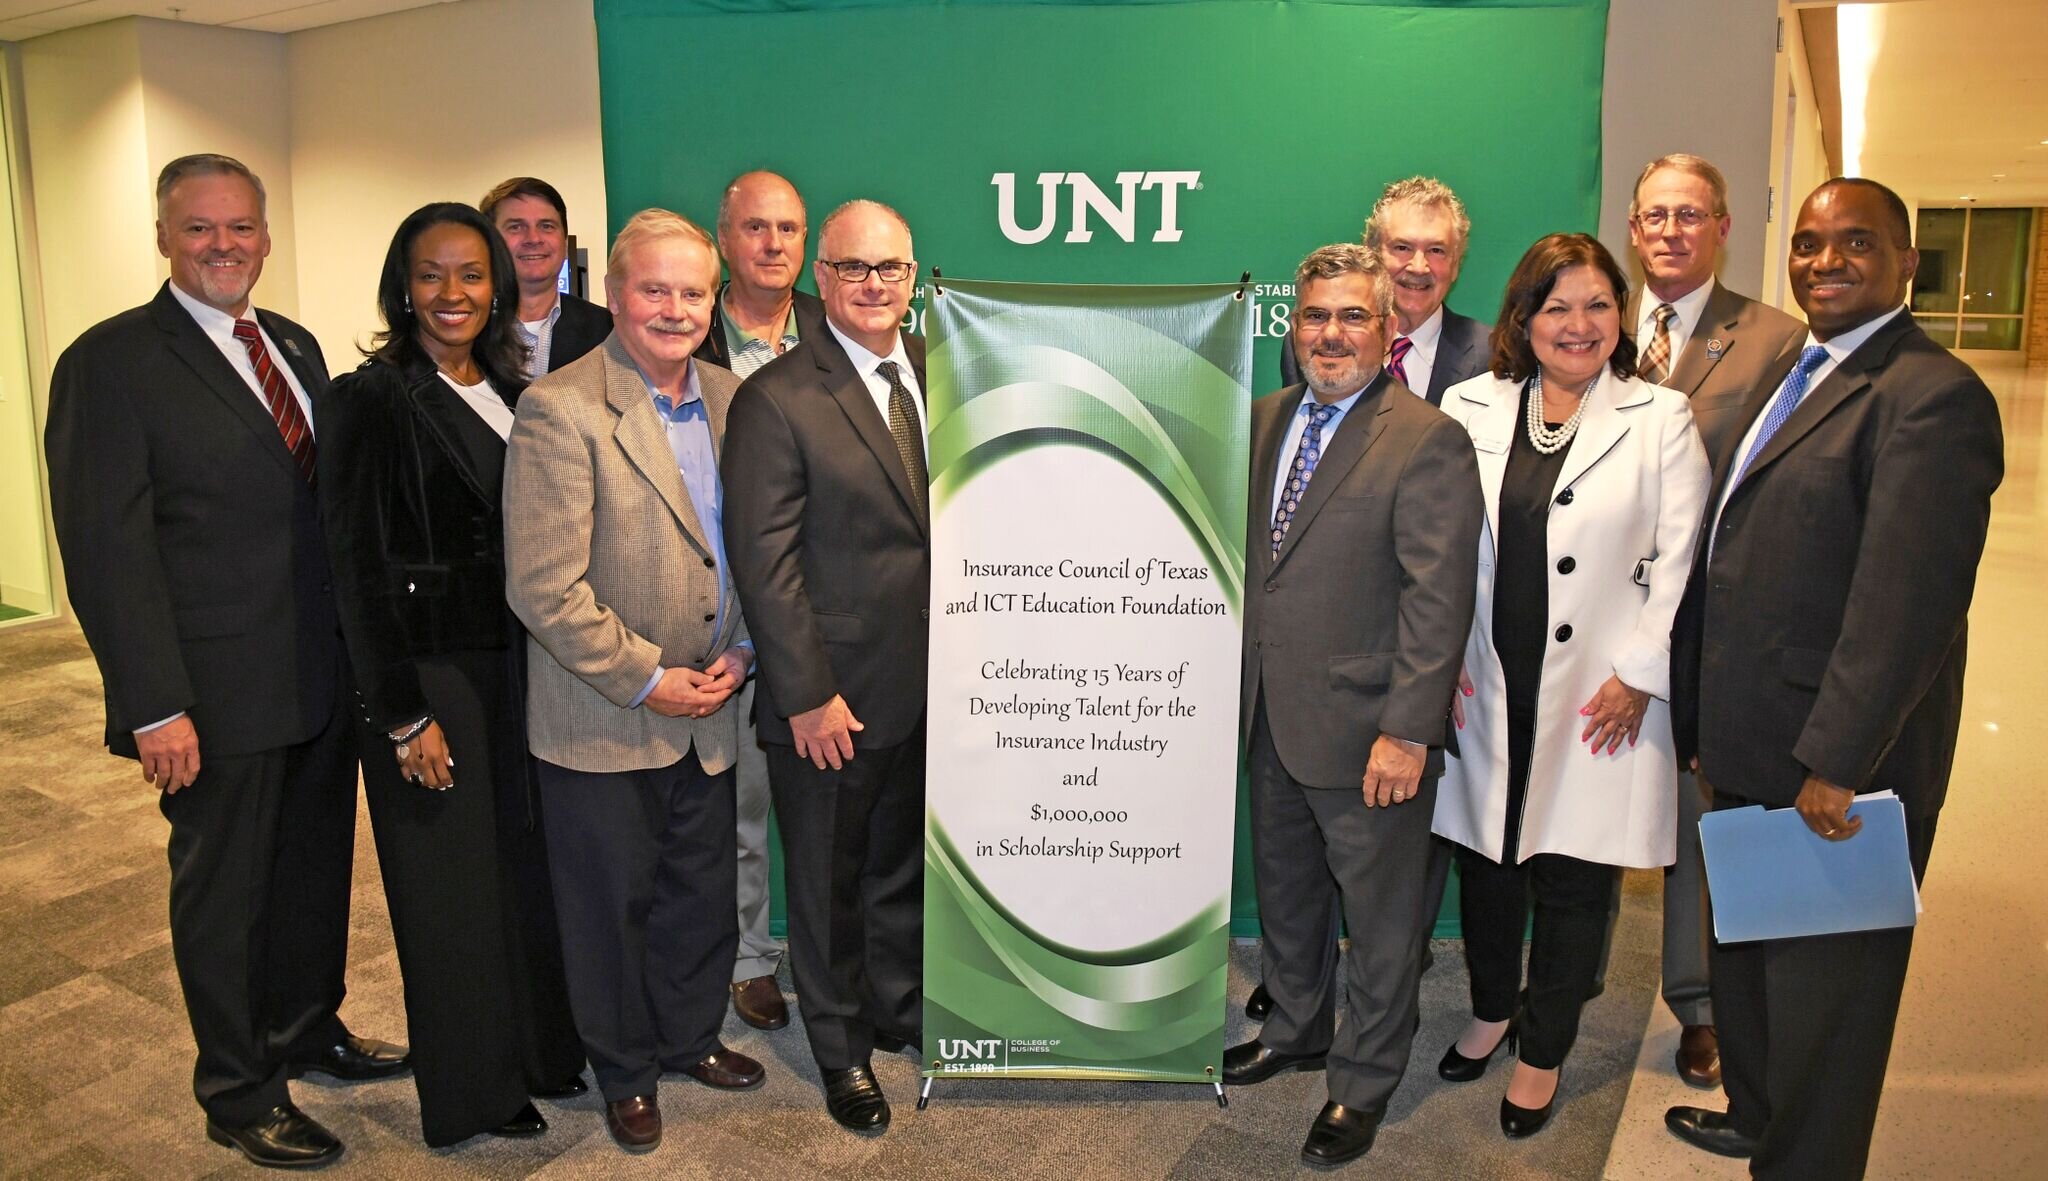  Fall 2018 - Insurance Council of Texas Education Foundation Board, presenting scholarships to students at the University of North Texas.  